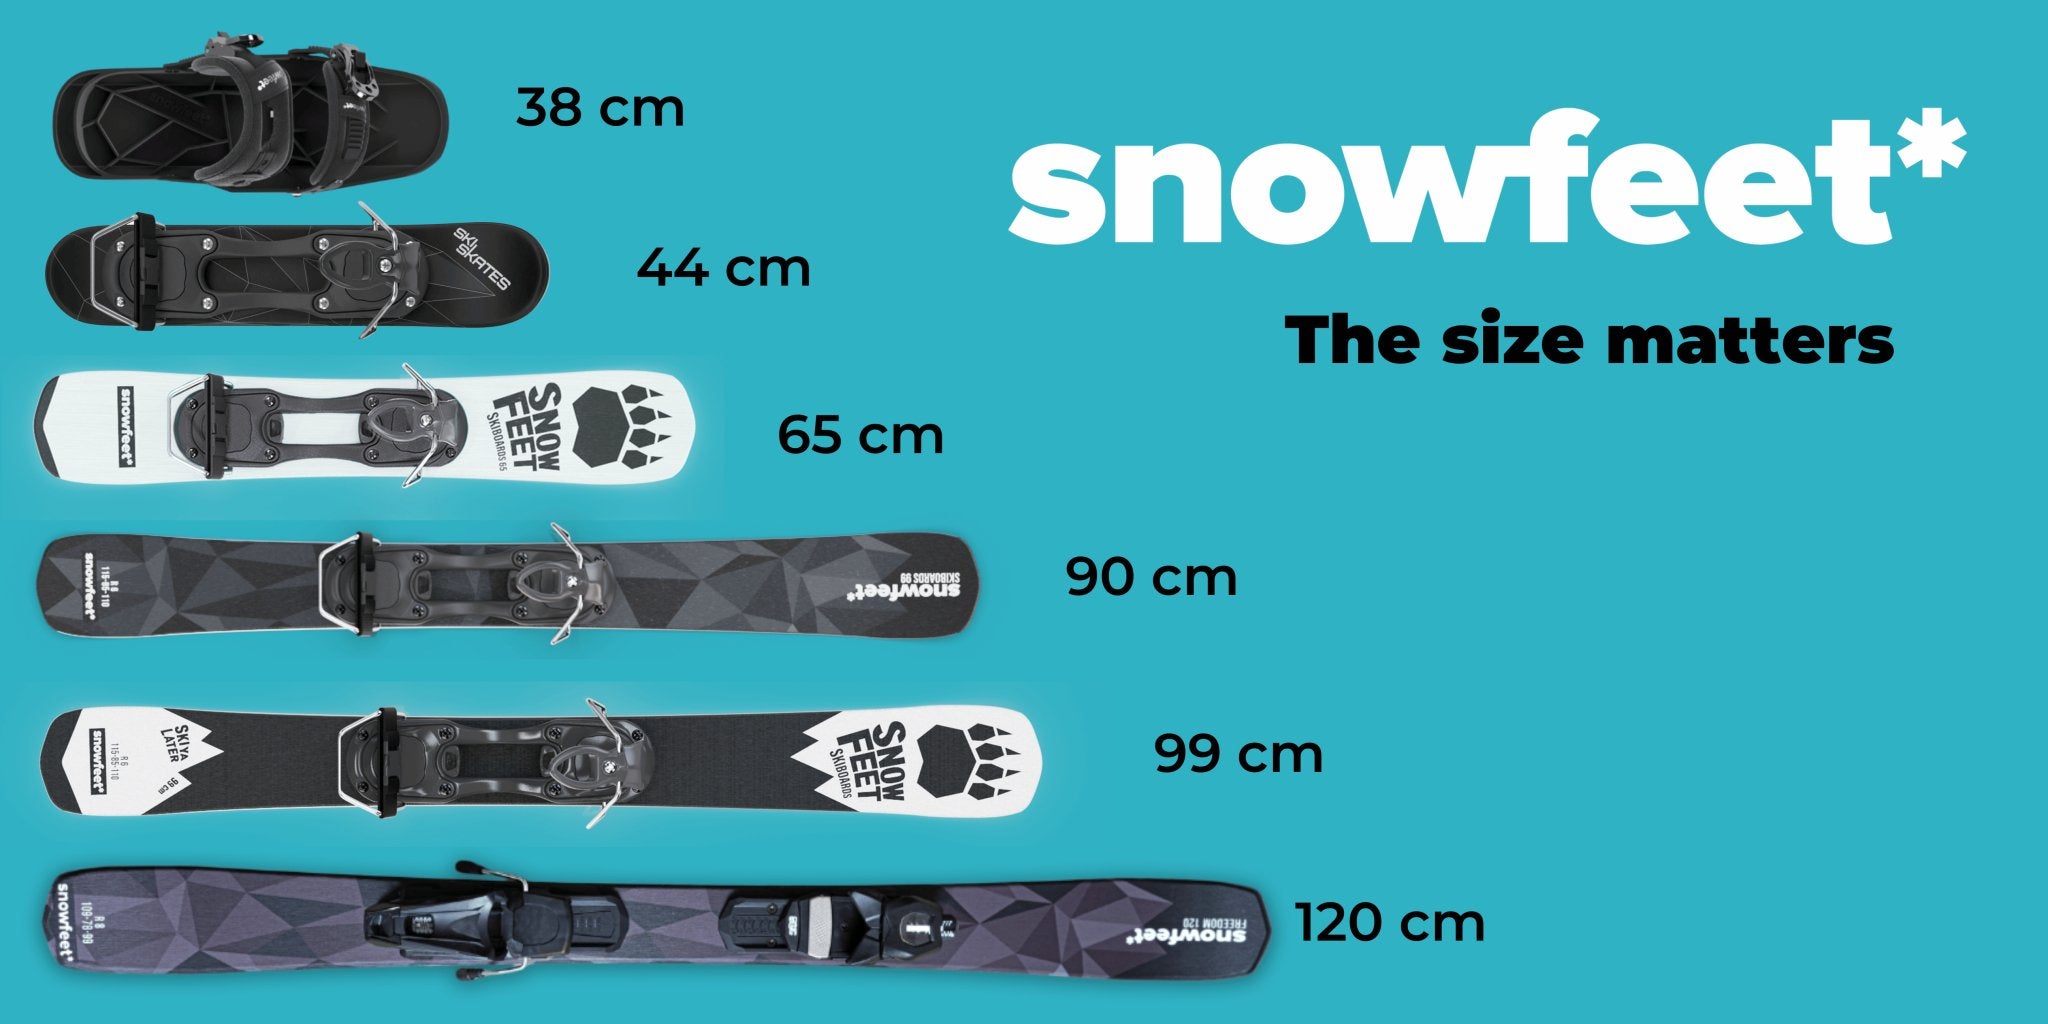 What Are Short Skis Called? - snowfeet*